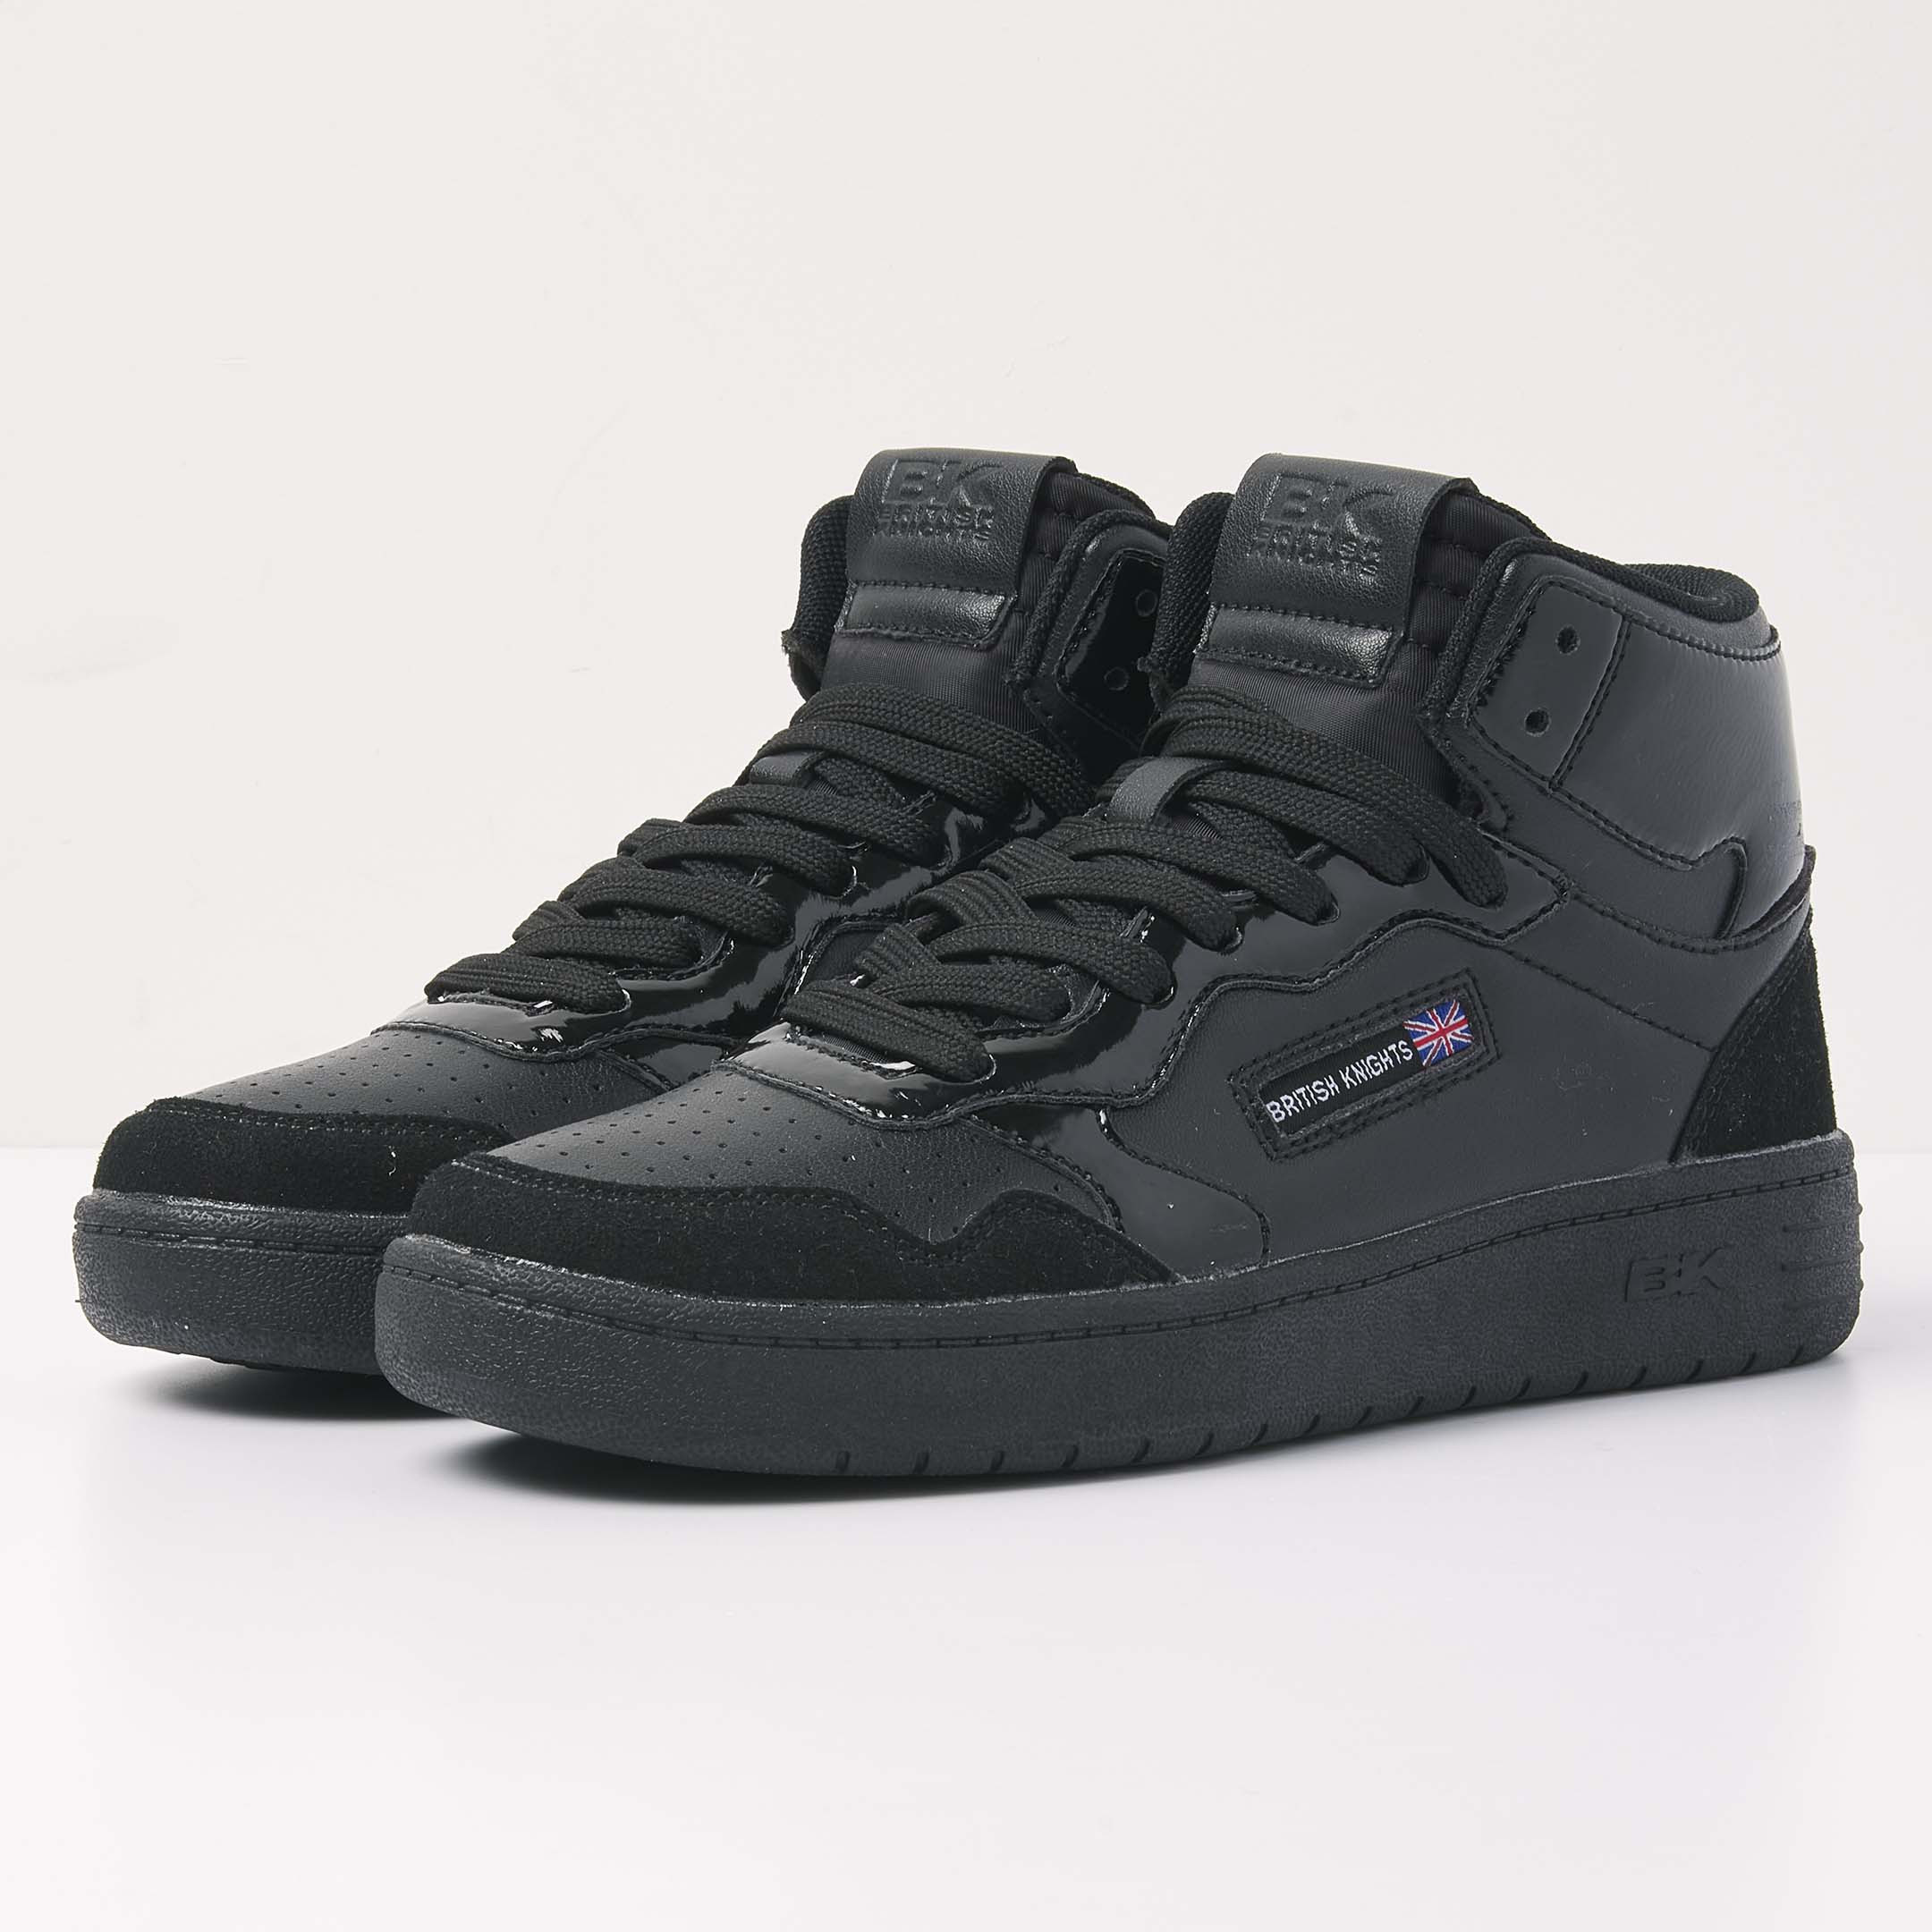 British Knights Sneaker Front view  B52-3616-04 NOORS MID HIGH-TOP FEMALE